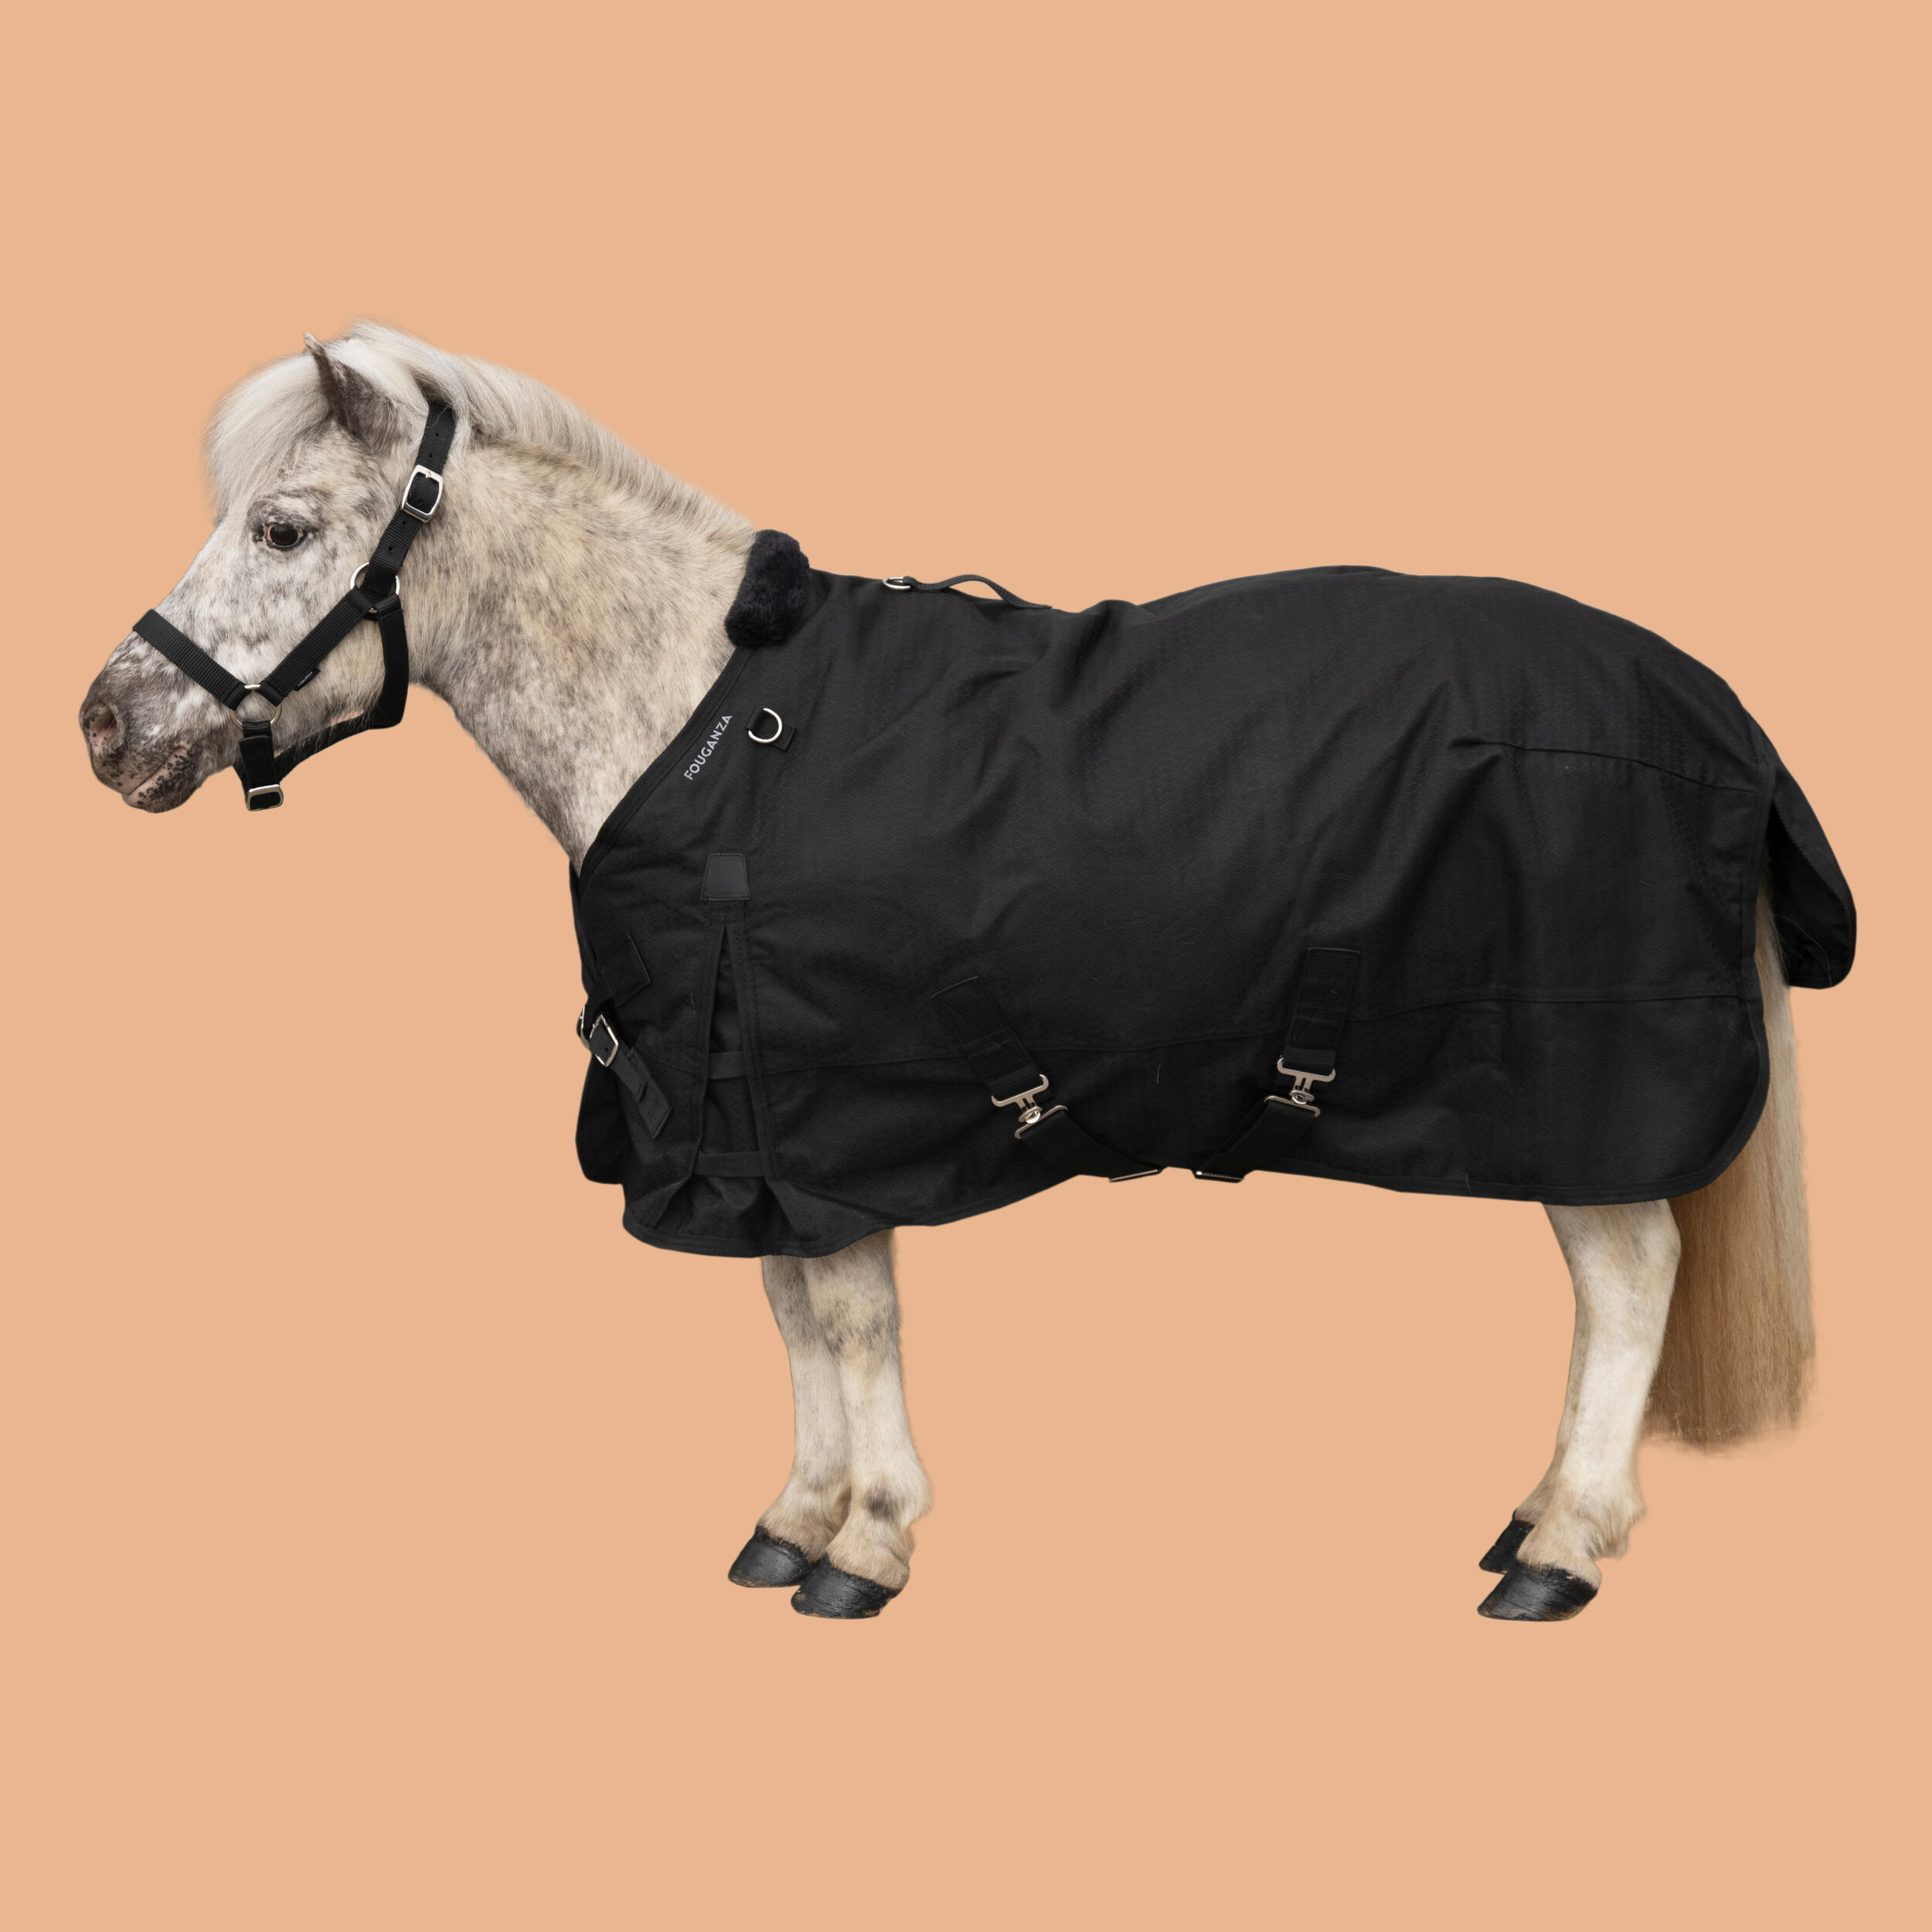 Horse Riding Waterproof Rug 1000D for Horse and Pony Allweather 200g 13/13